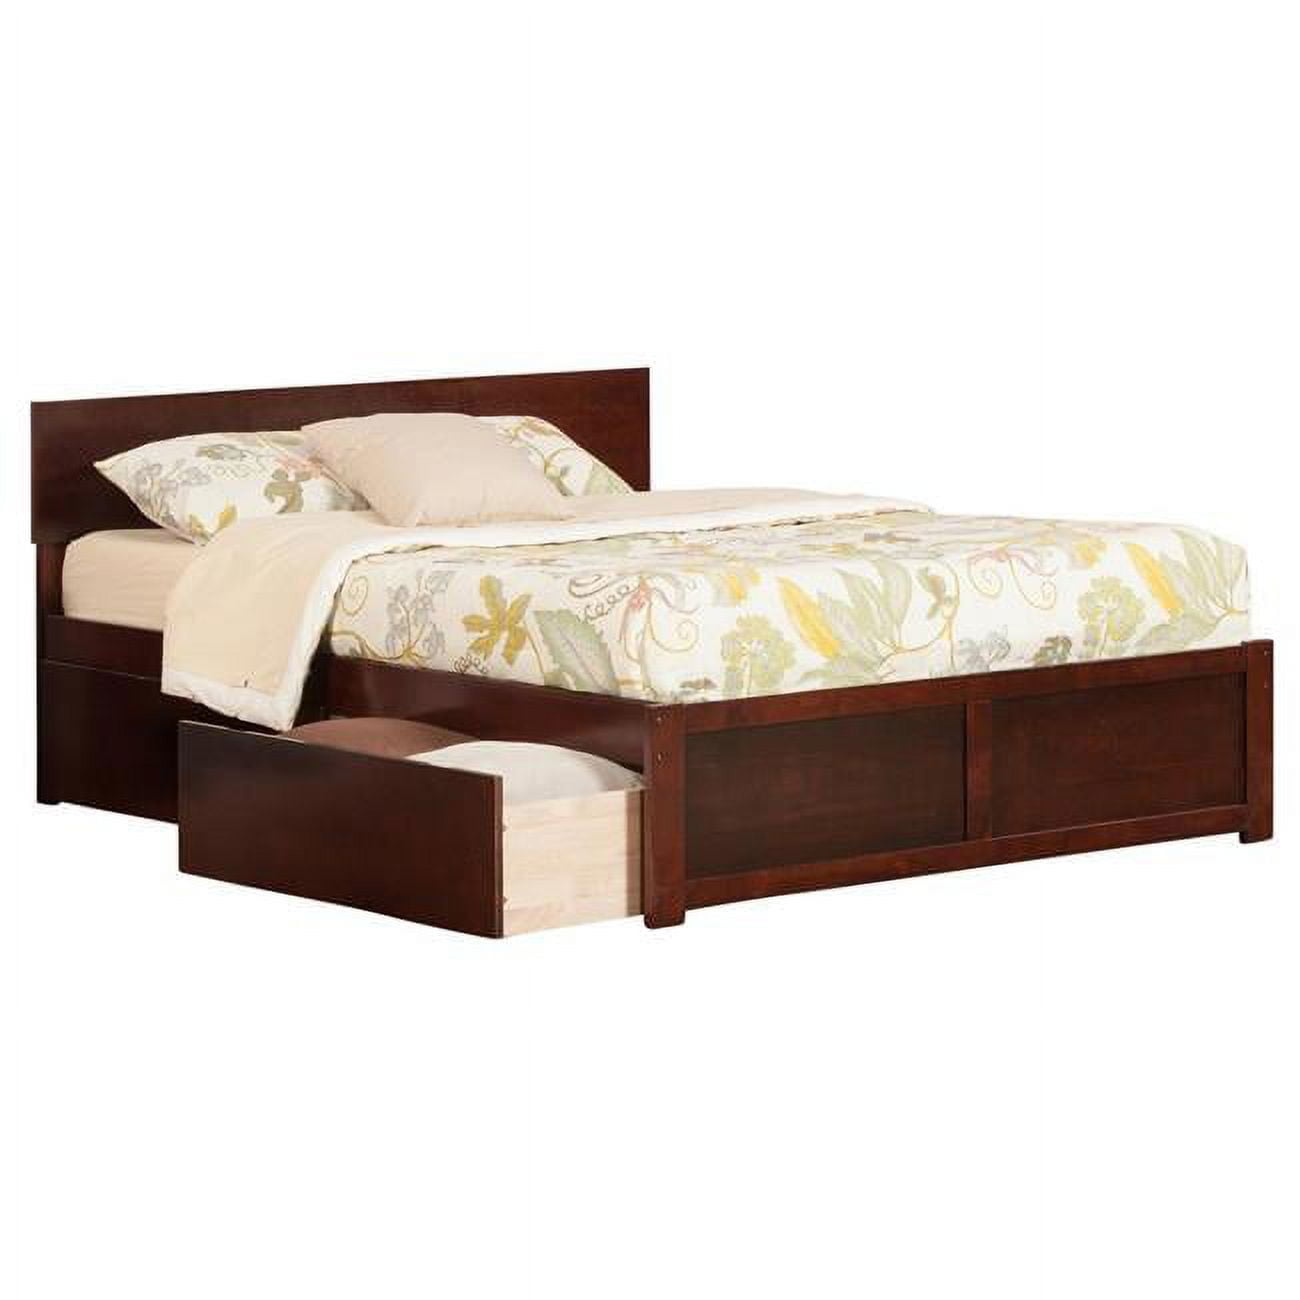 Picture of Atlantic Furniture AR8616032 Madison Extra LargeBed with Match Footboard in White, Twin Size